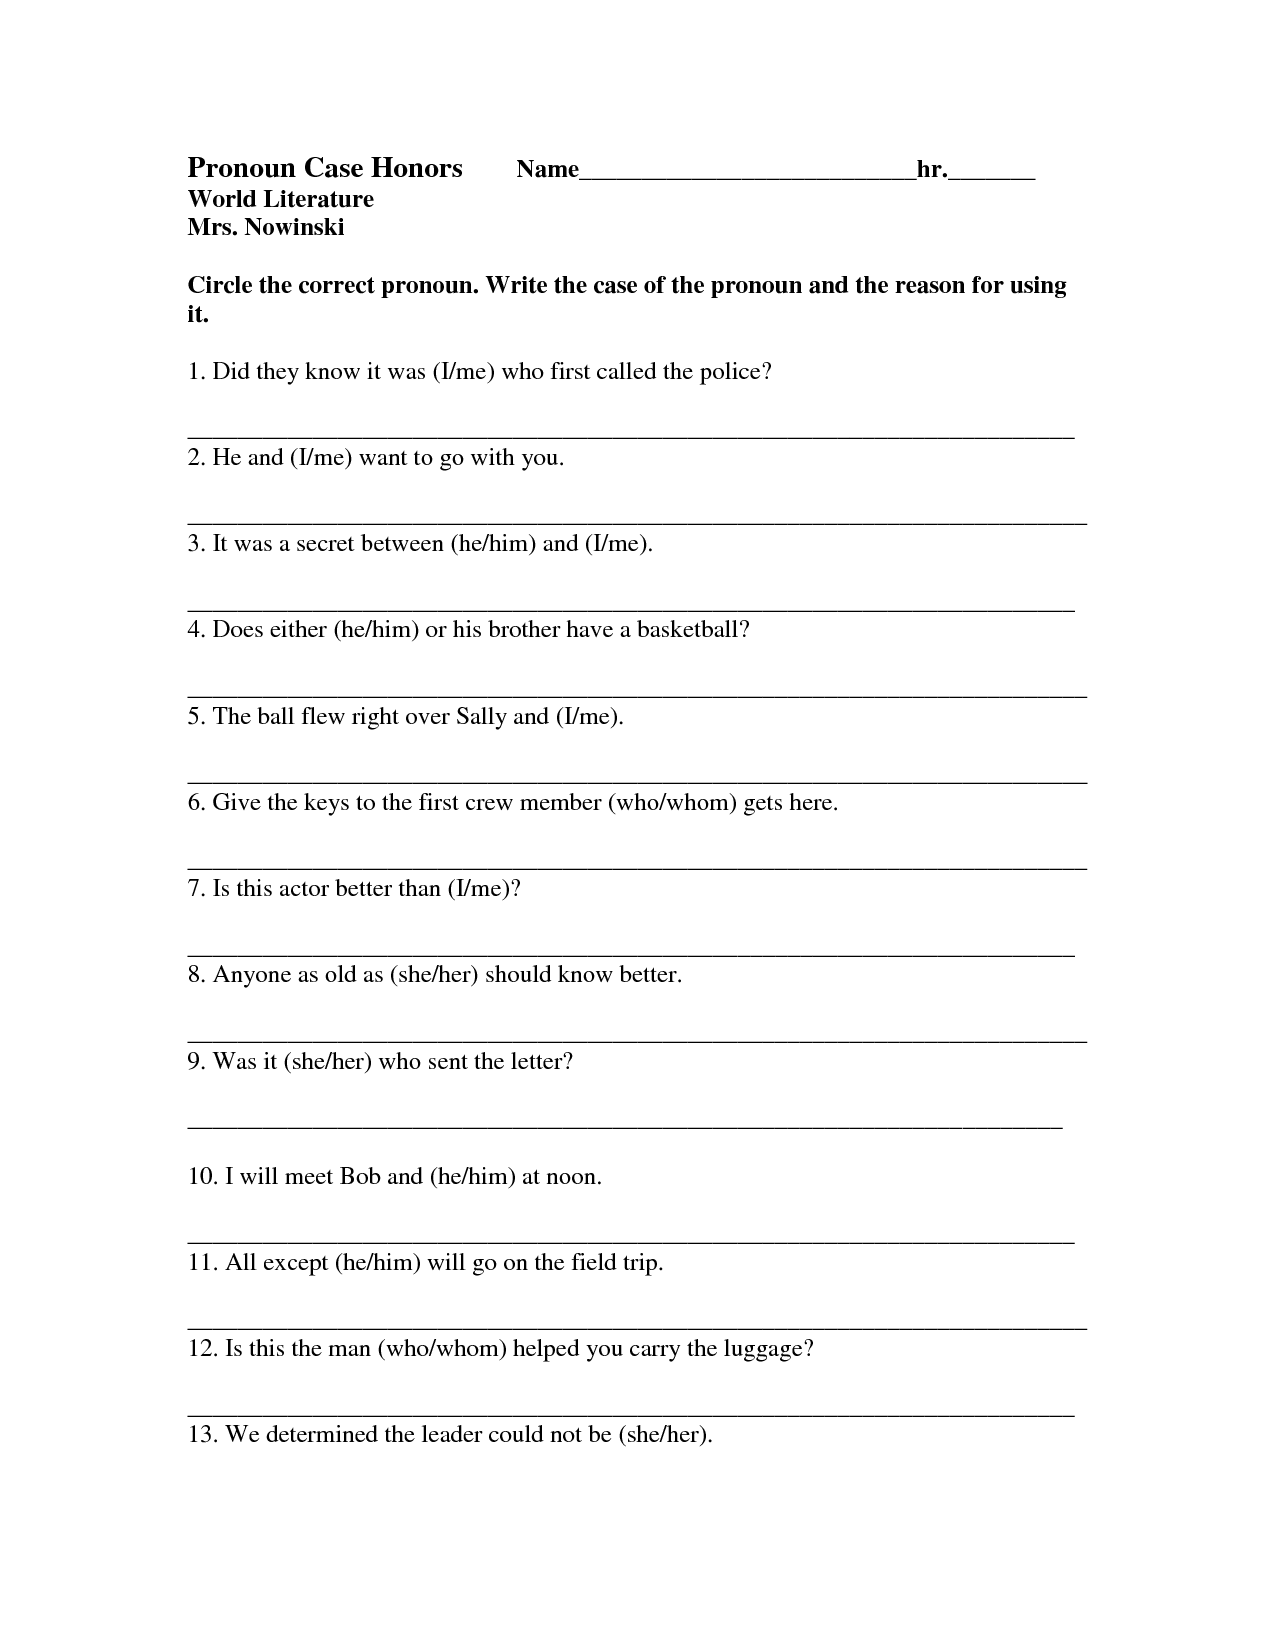 19 Best Images Of Pronoun Who Whom Worksheets Printable Worksheet Who Whose Whom Relative